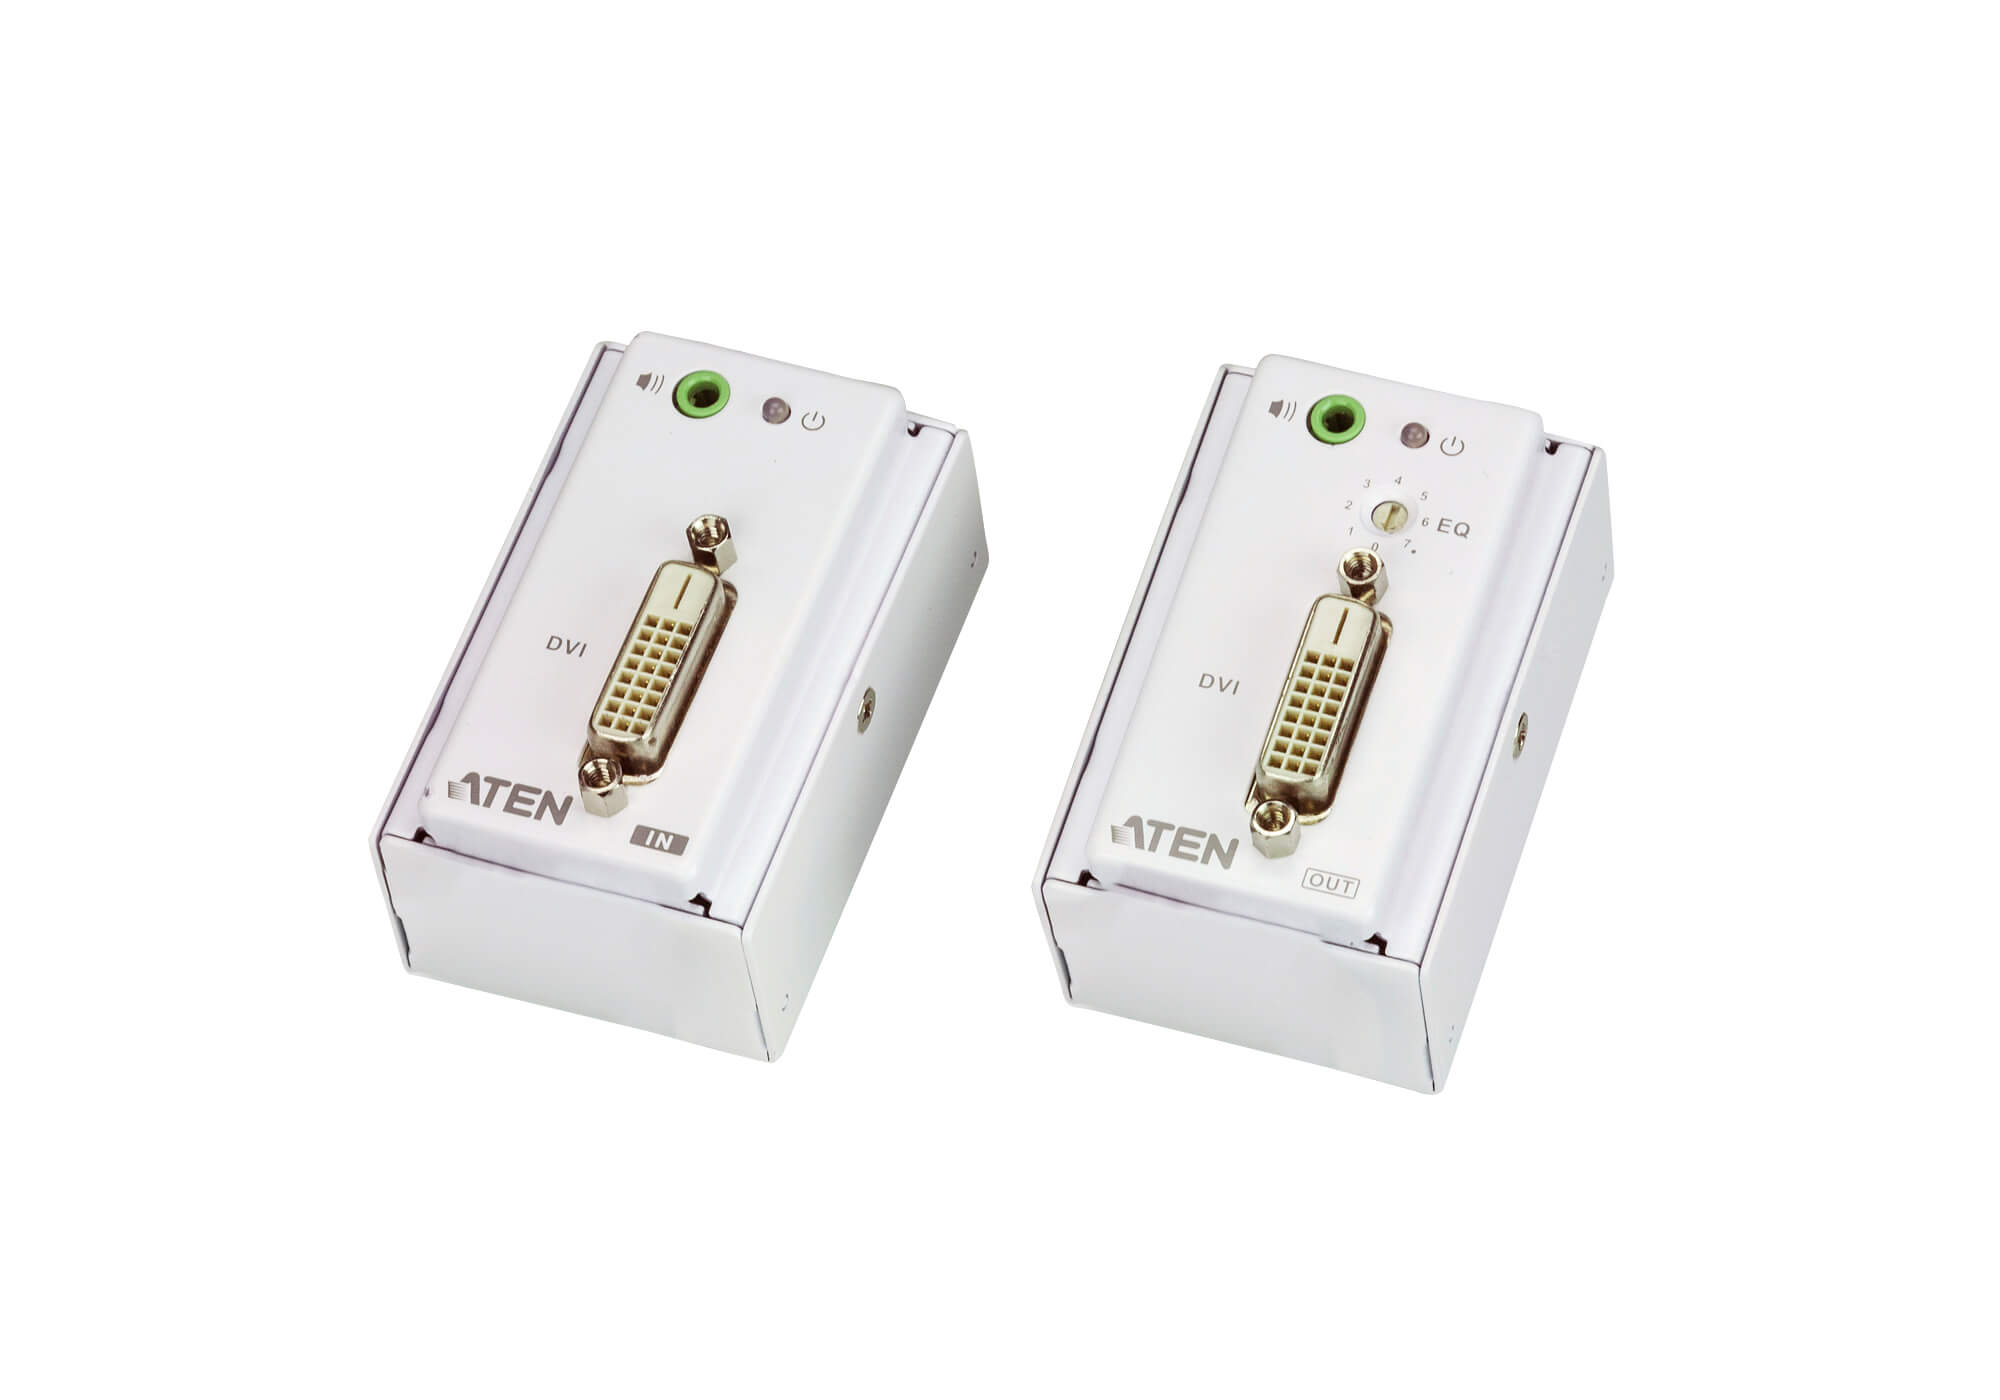 You Recently Viewed Aten VE607 Wall Plate DVI /Audio Cat 5 Extender,30M Image